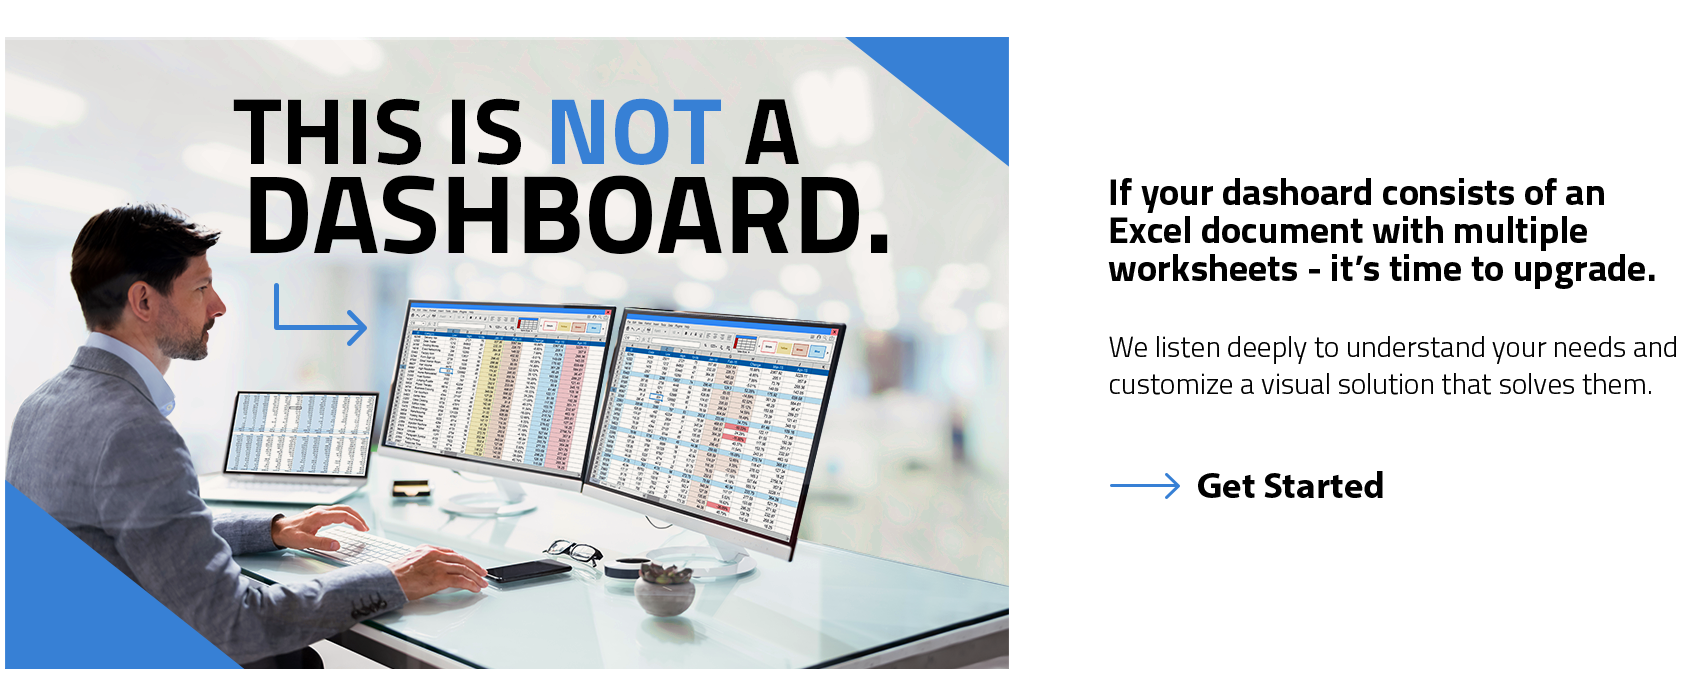 Excel is not a dashboard